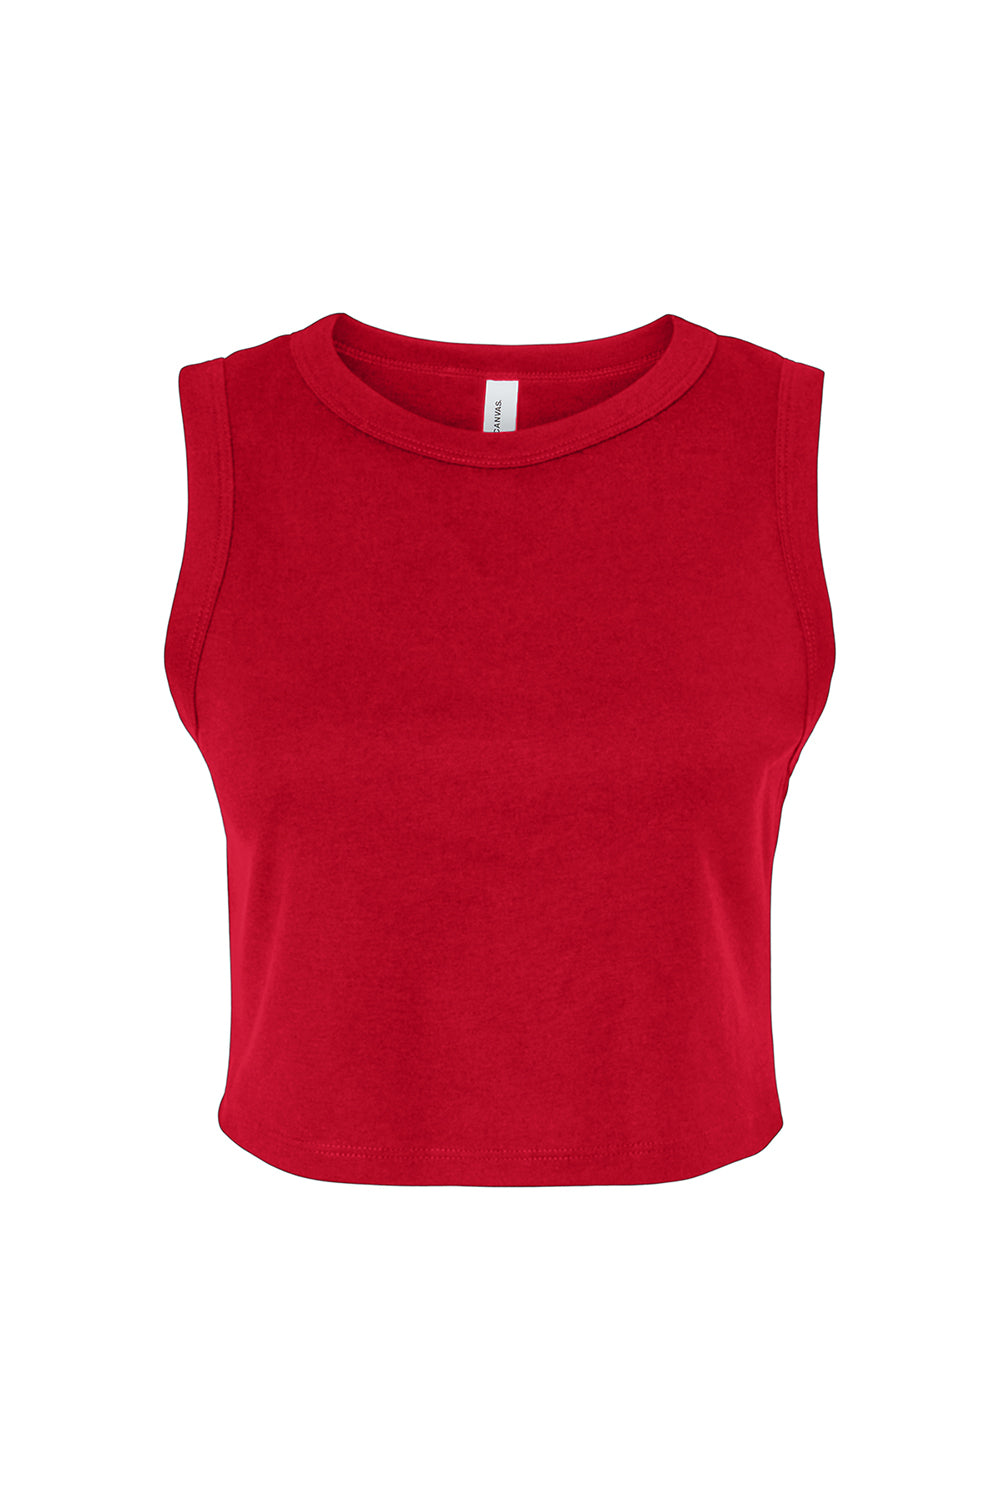 Bella + Canvas 1013BE Womens Micro Ribbed Muscle Crop Tank Top Red Flat Front